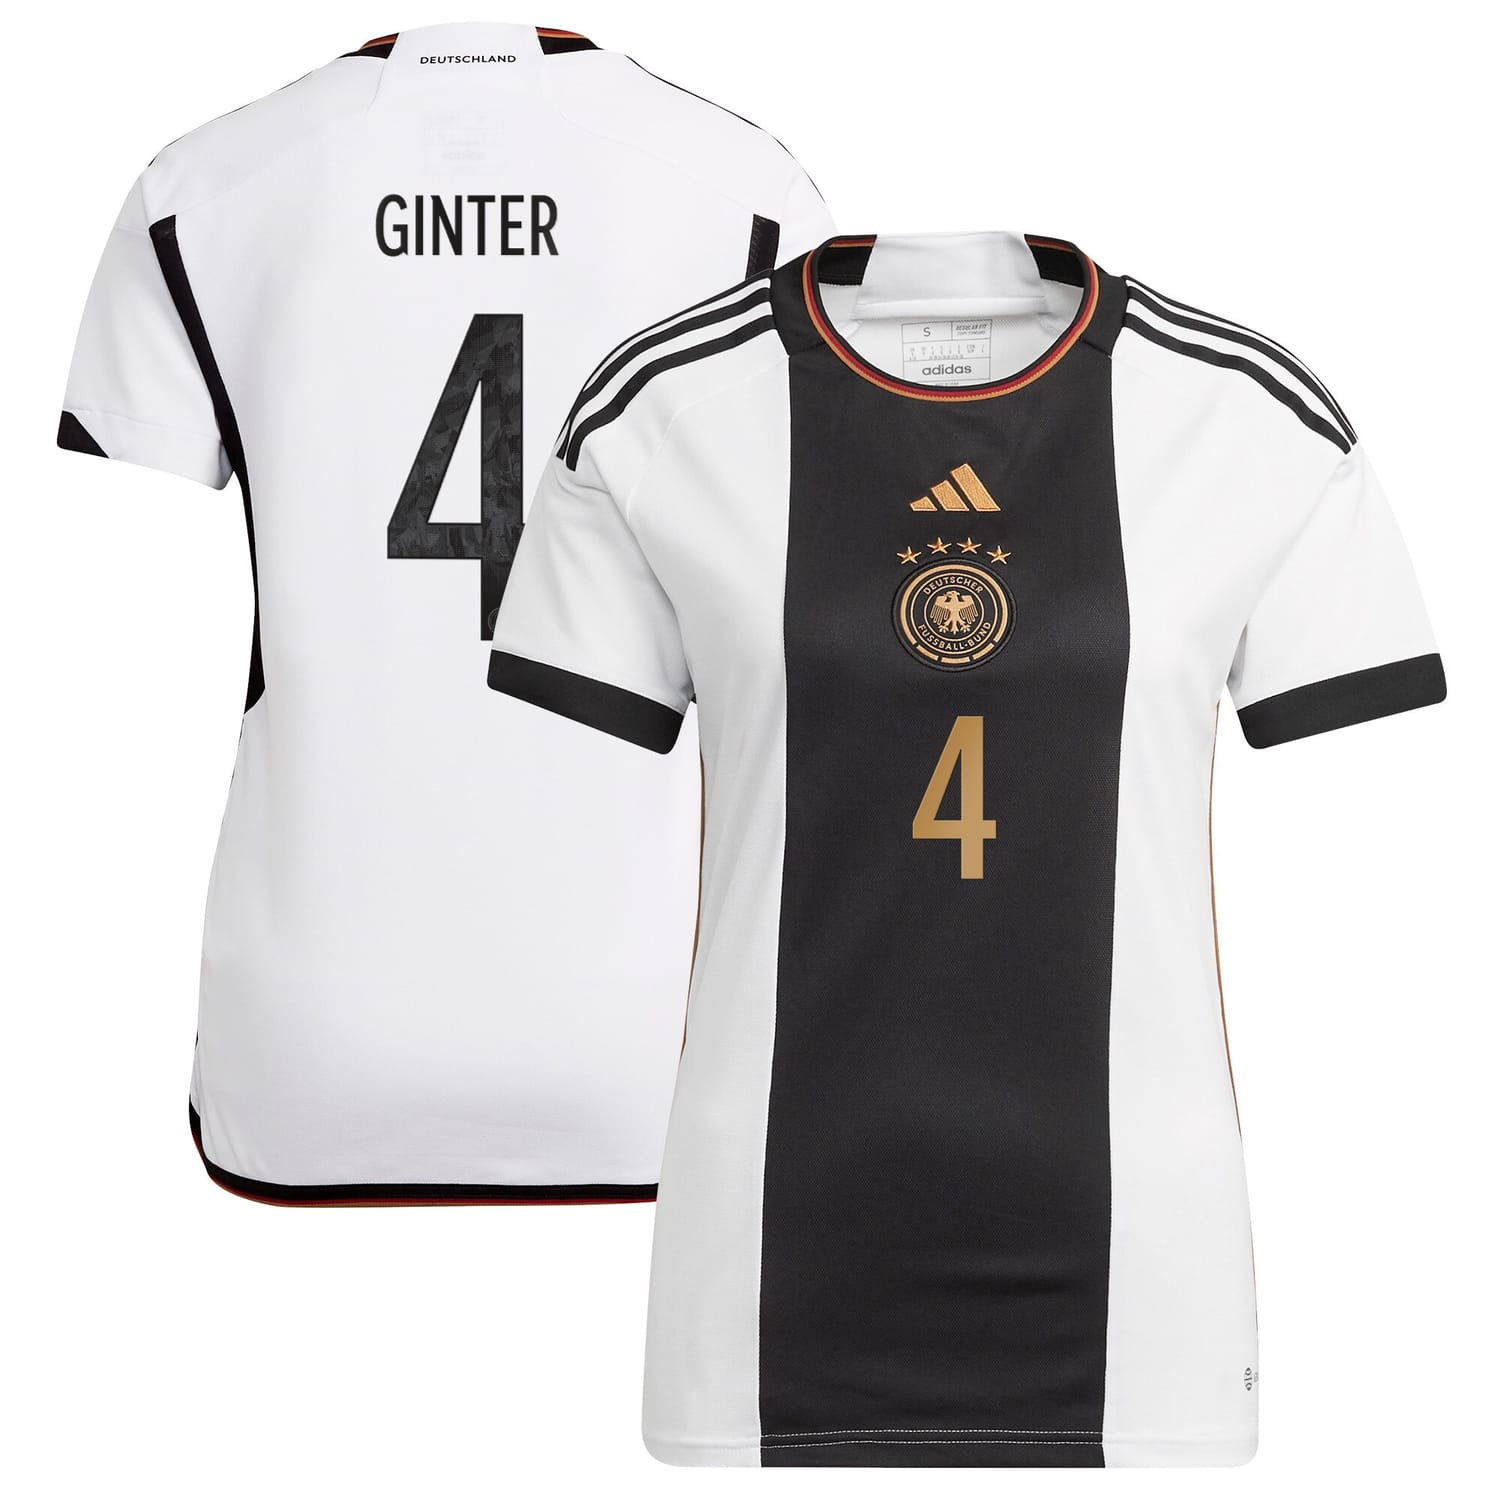 Germany National Team Home Jersey Shirt player Matthias Ginter 4 printing for Women